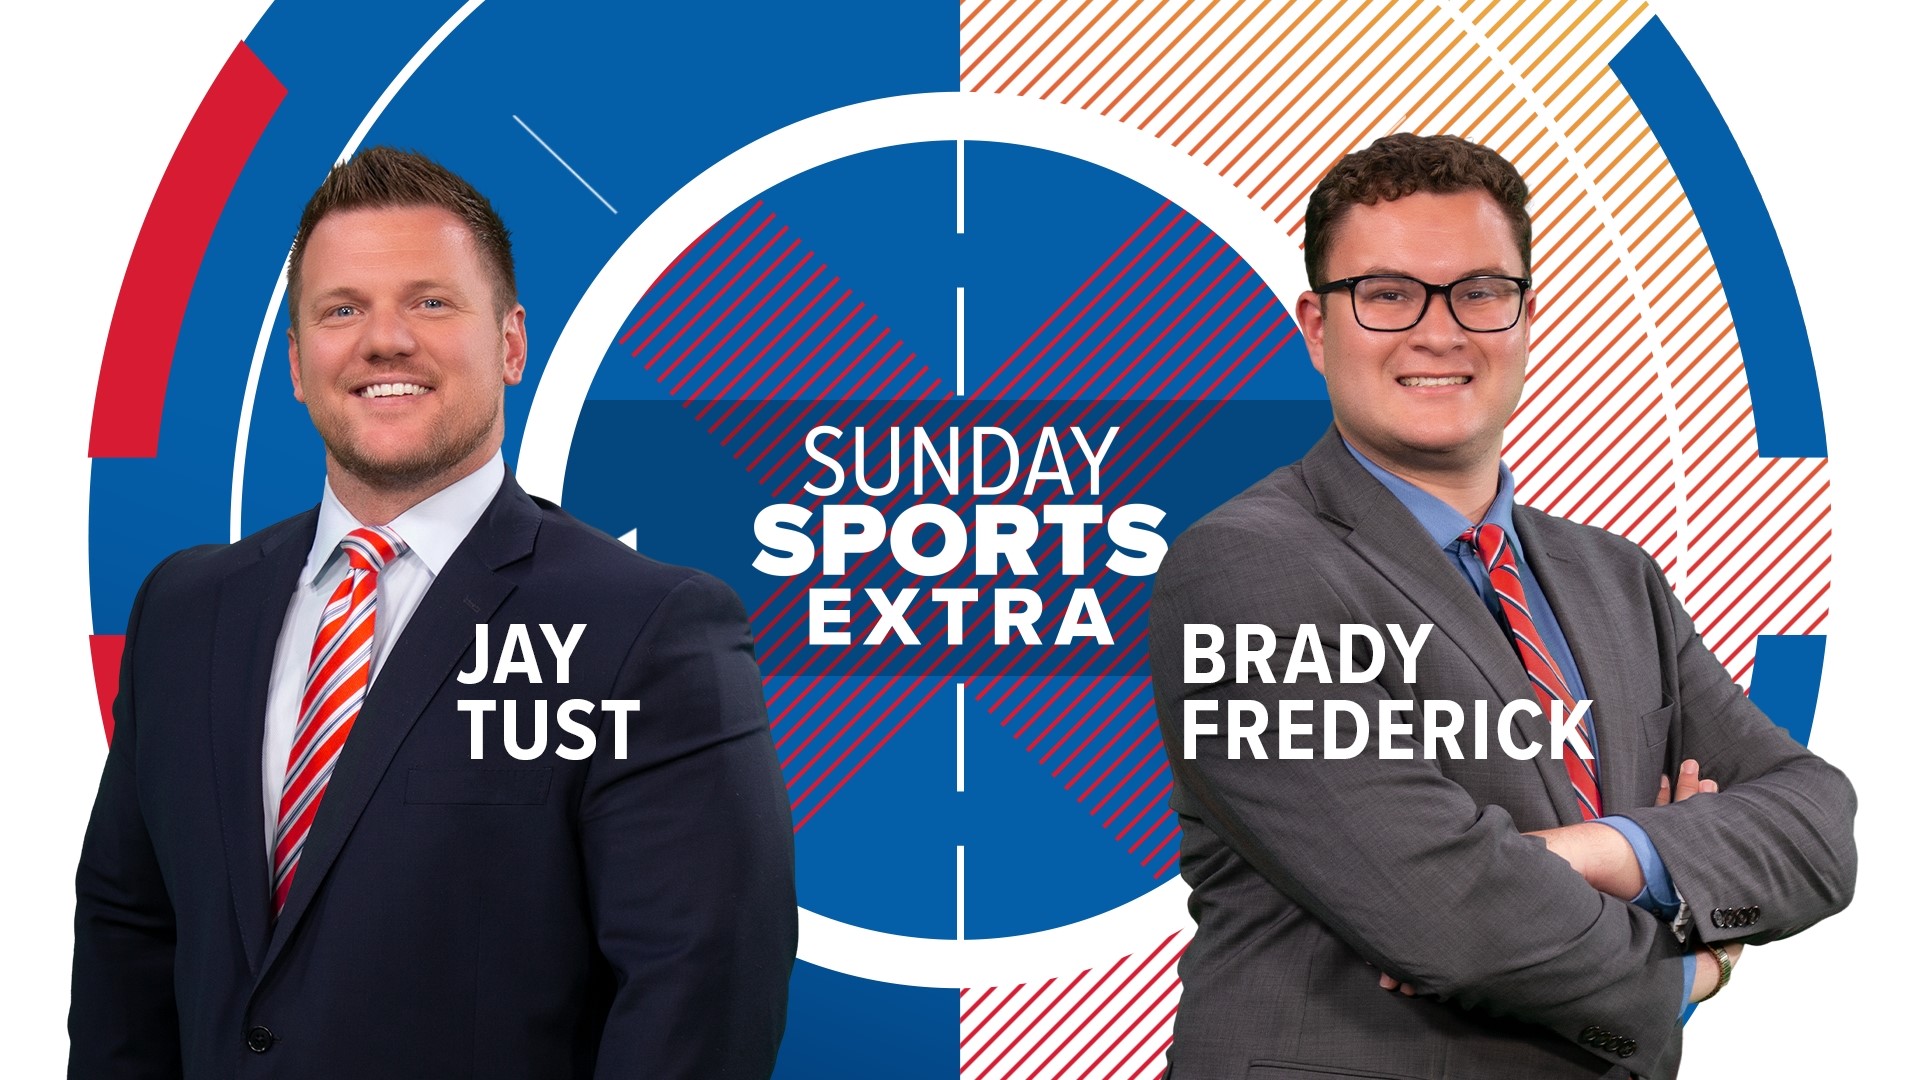 Join KTVB Sports anchors Jay Tust and Brady Frederick as they highlight the biggest sports stories of the week.